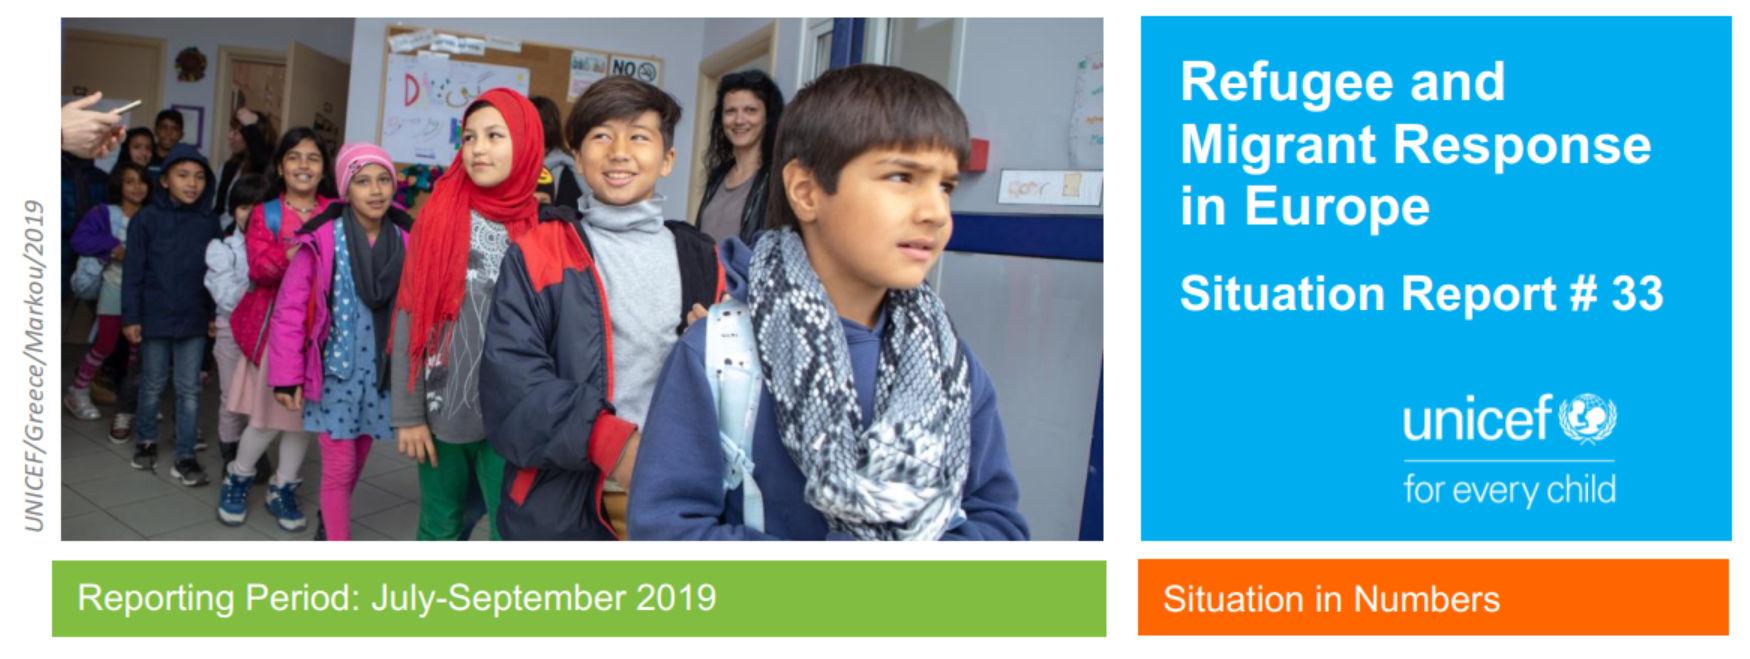 UNICEF Refugee and Migrant Crisis in Europe: Humanitarian Situation Report #33 (Jul- Sep 2019)